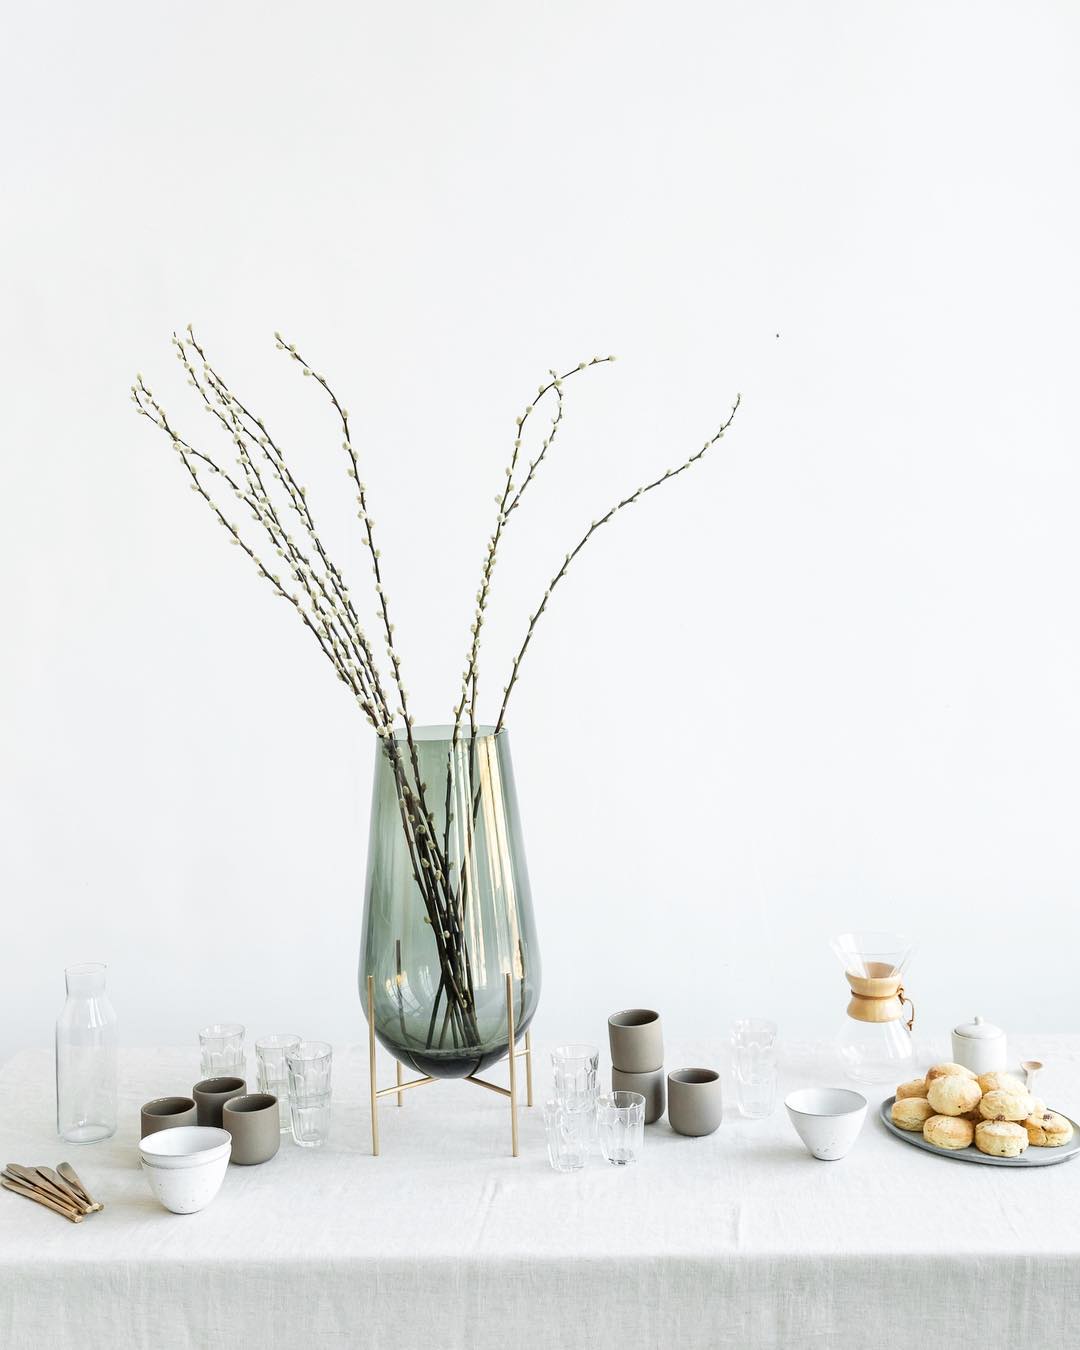 White table setting with a big green vase, ceramic coffee cups and scones